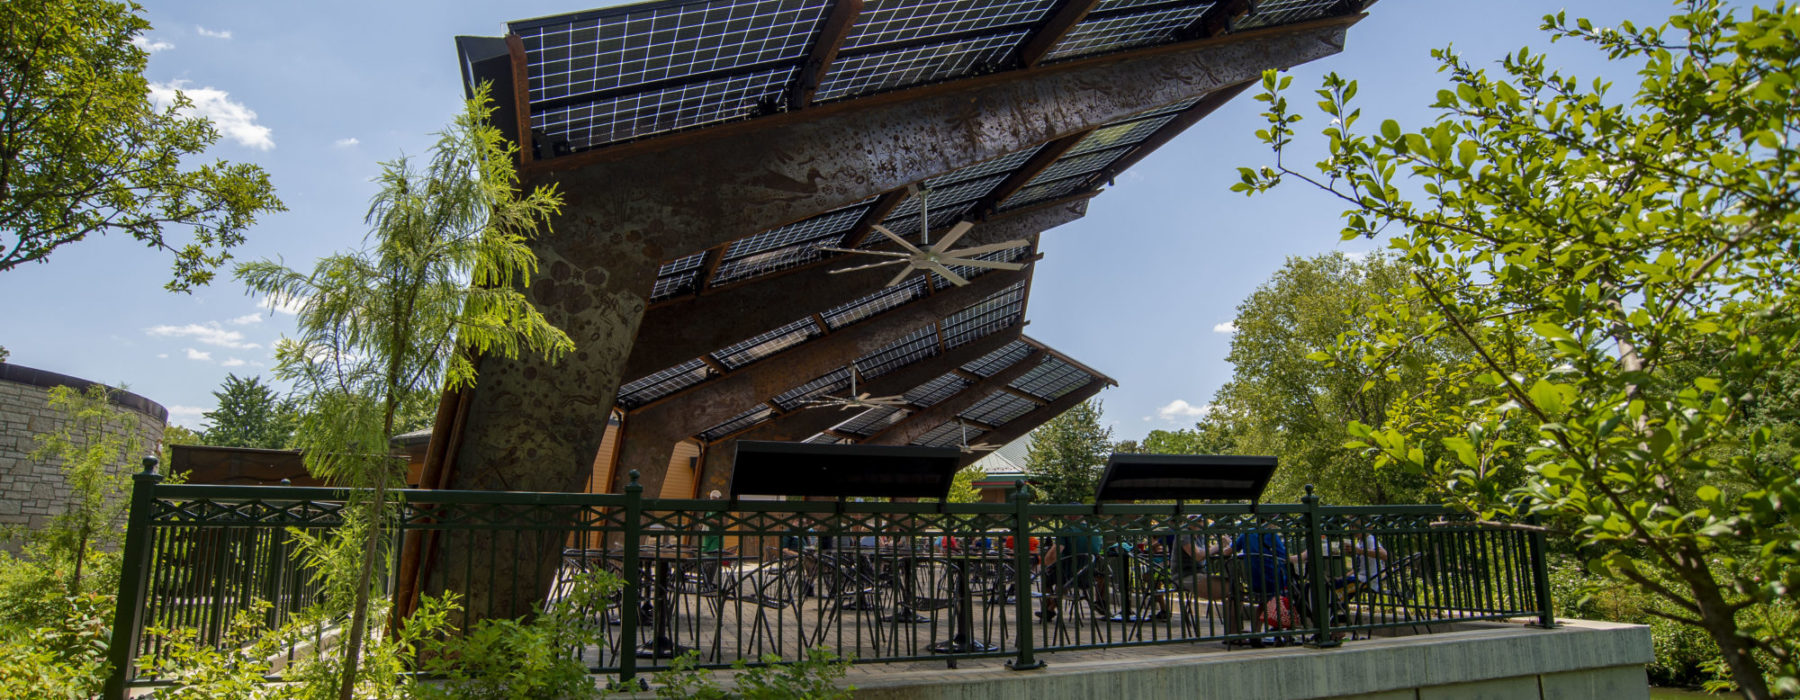 Side Image of the St. Louis Zoo Solar Canopy